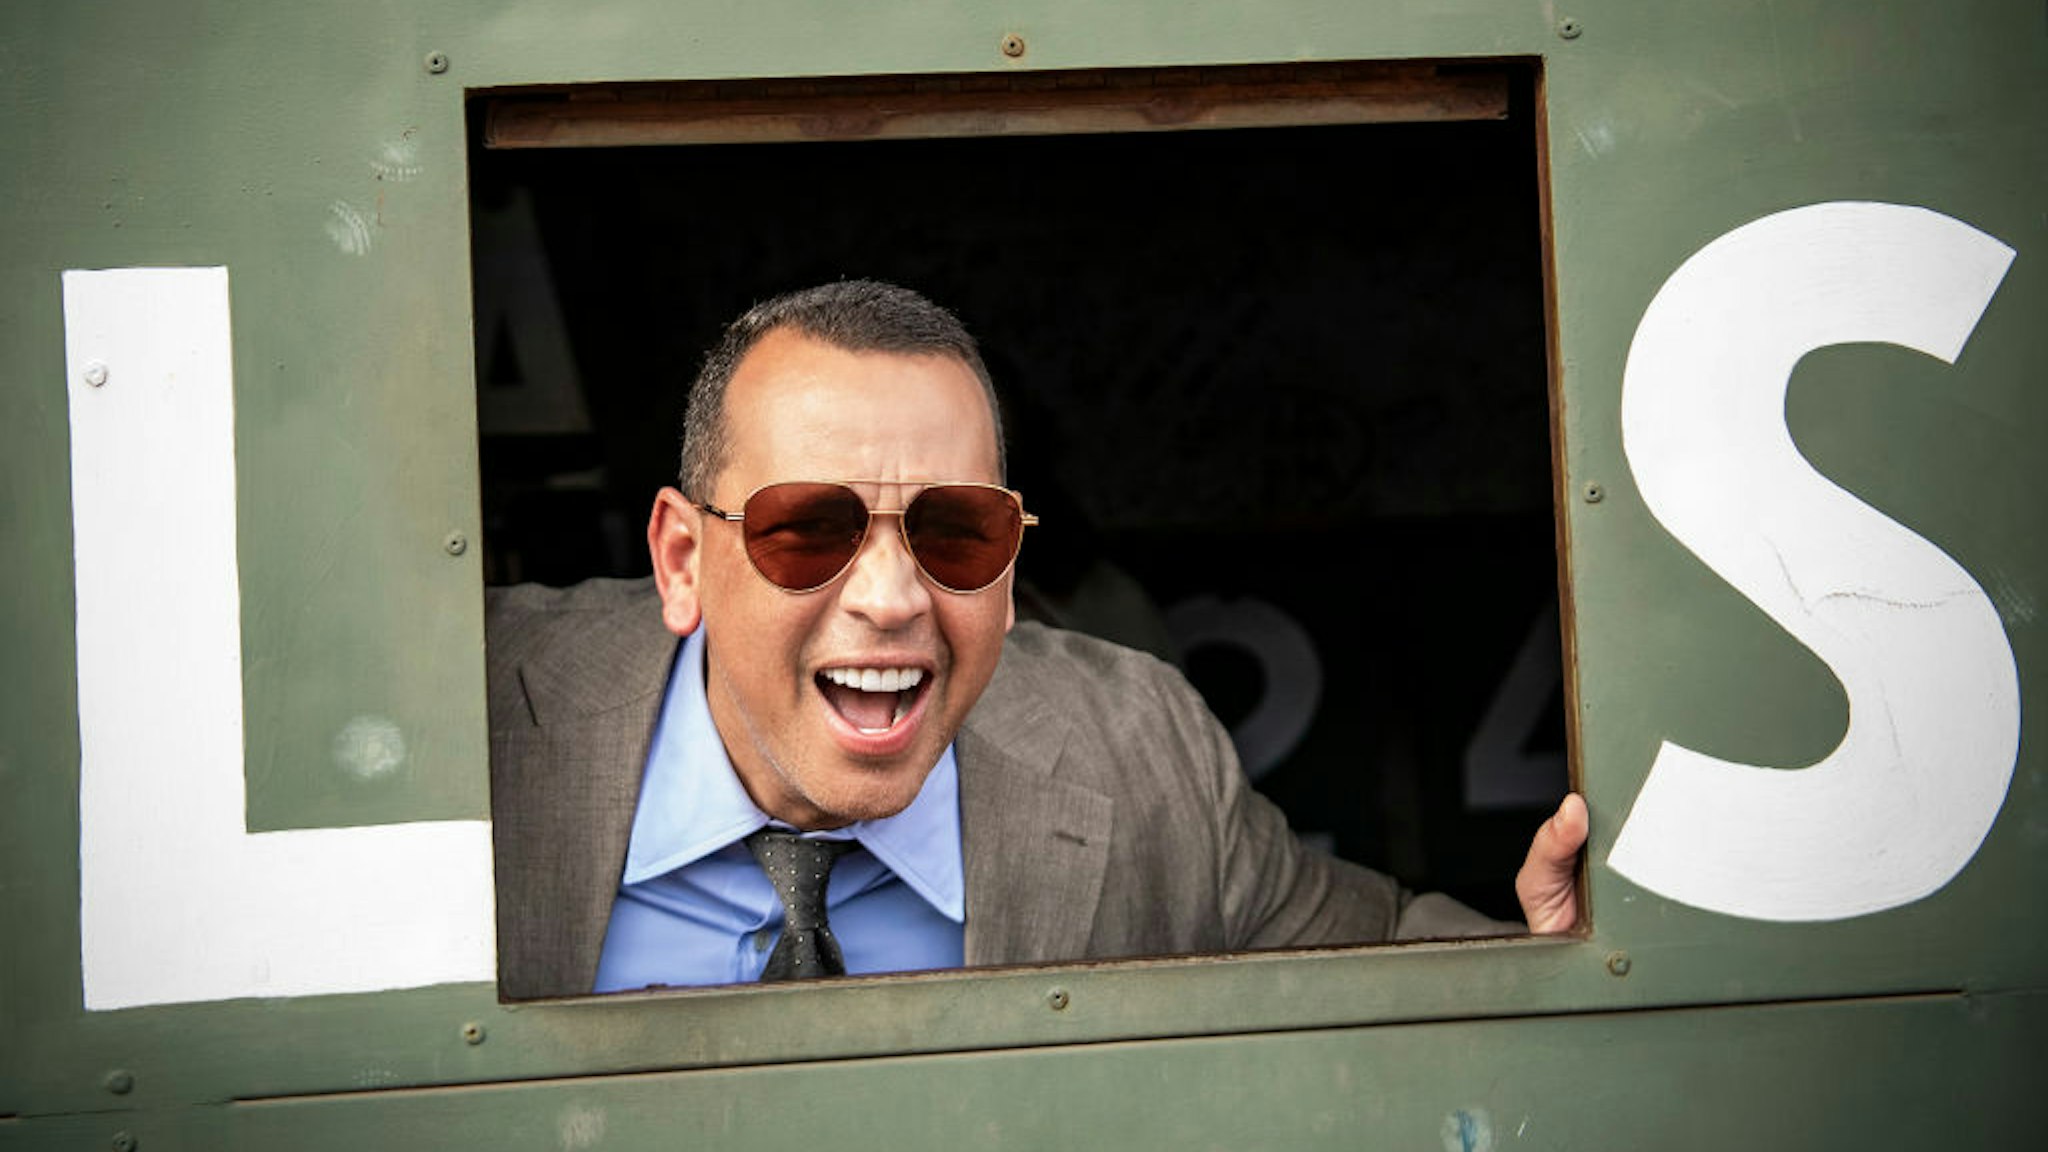 BOSTON, MA - SEPTEMBER 8: ESPN Sunday Night Baseball color commentator Alex Rodriguez poses from inside the Green Monster before a game between the Boston Red Sox and the New York Yankees on September 8, 2019 at Fenway Park in Boston, Massachusetts. (Photo by Billie Weiss/Boston Red Sox/Getty Images)